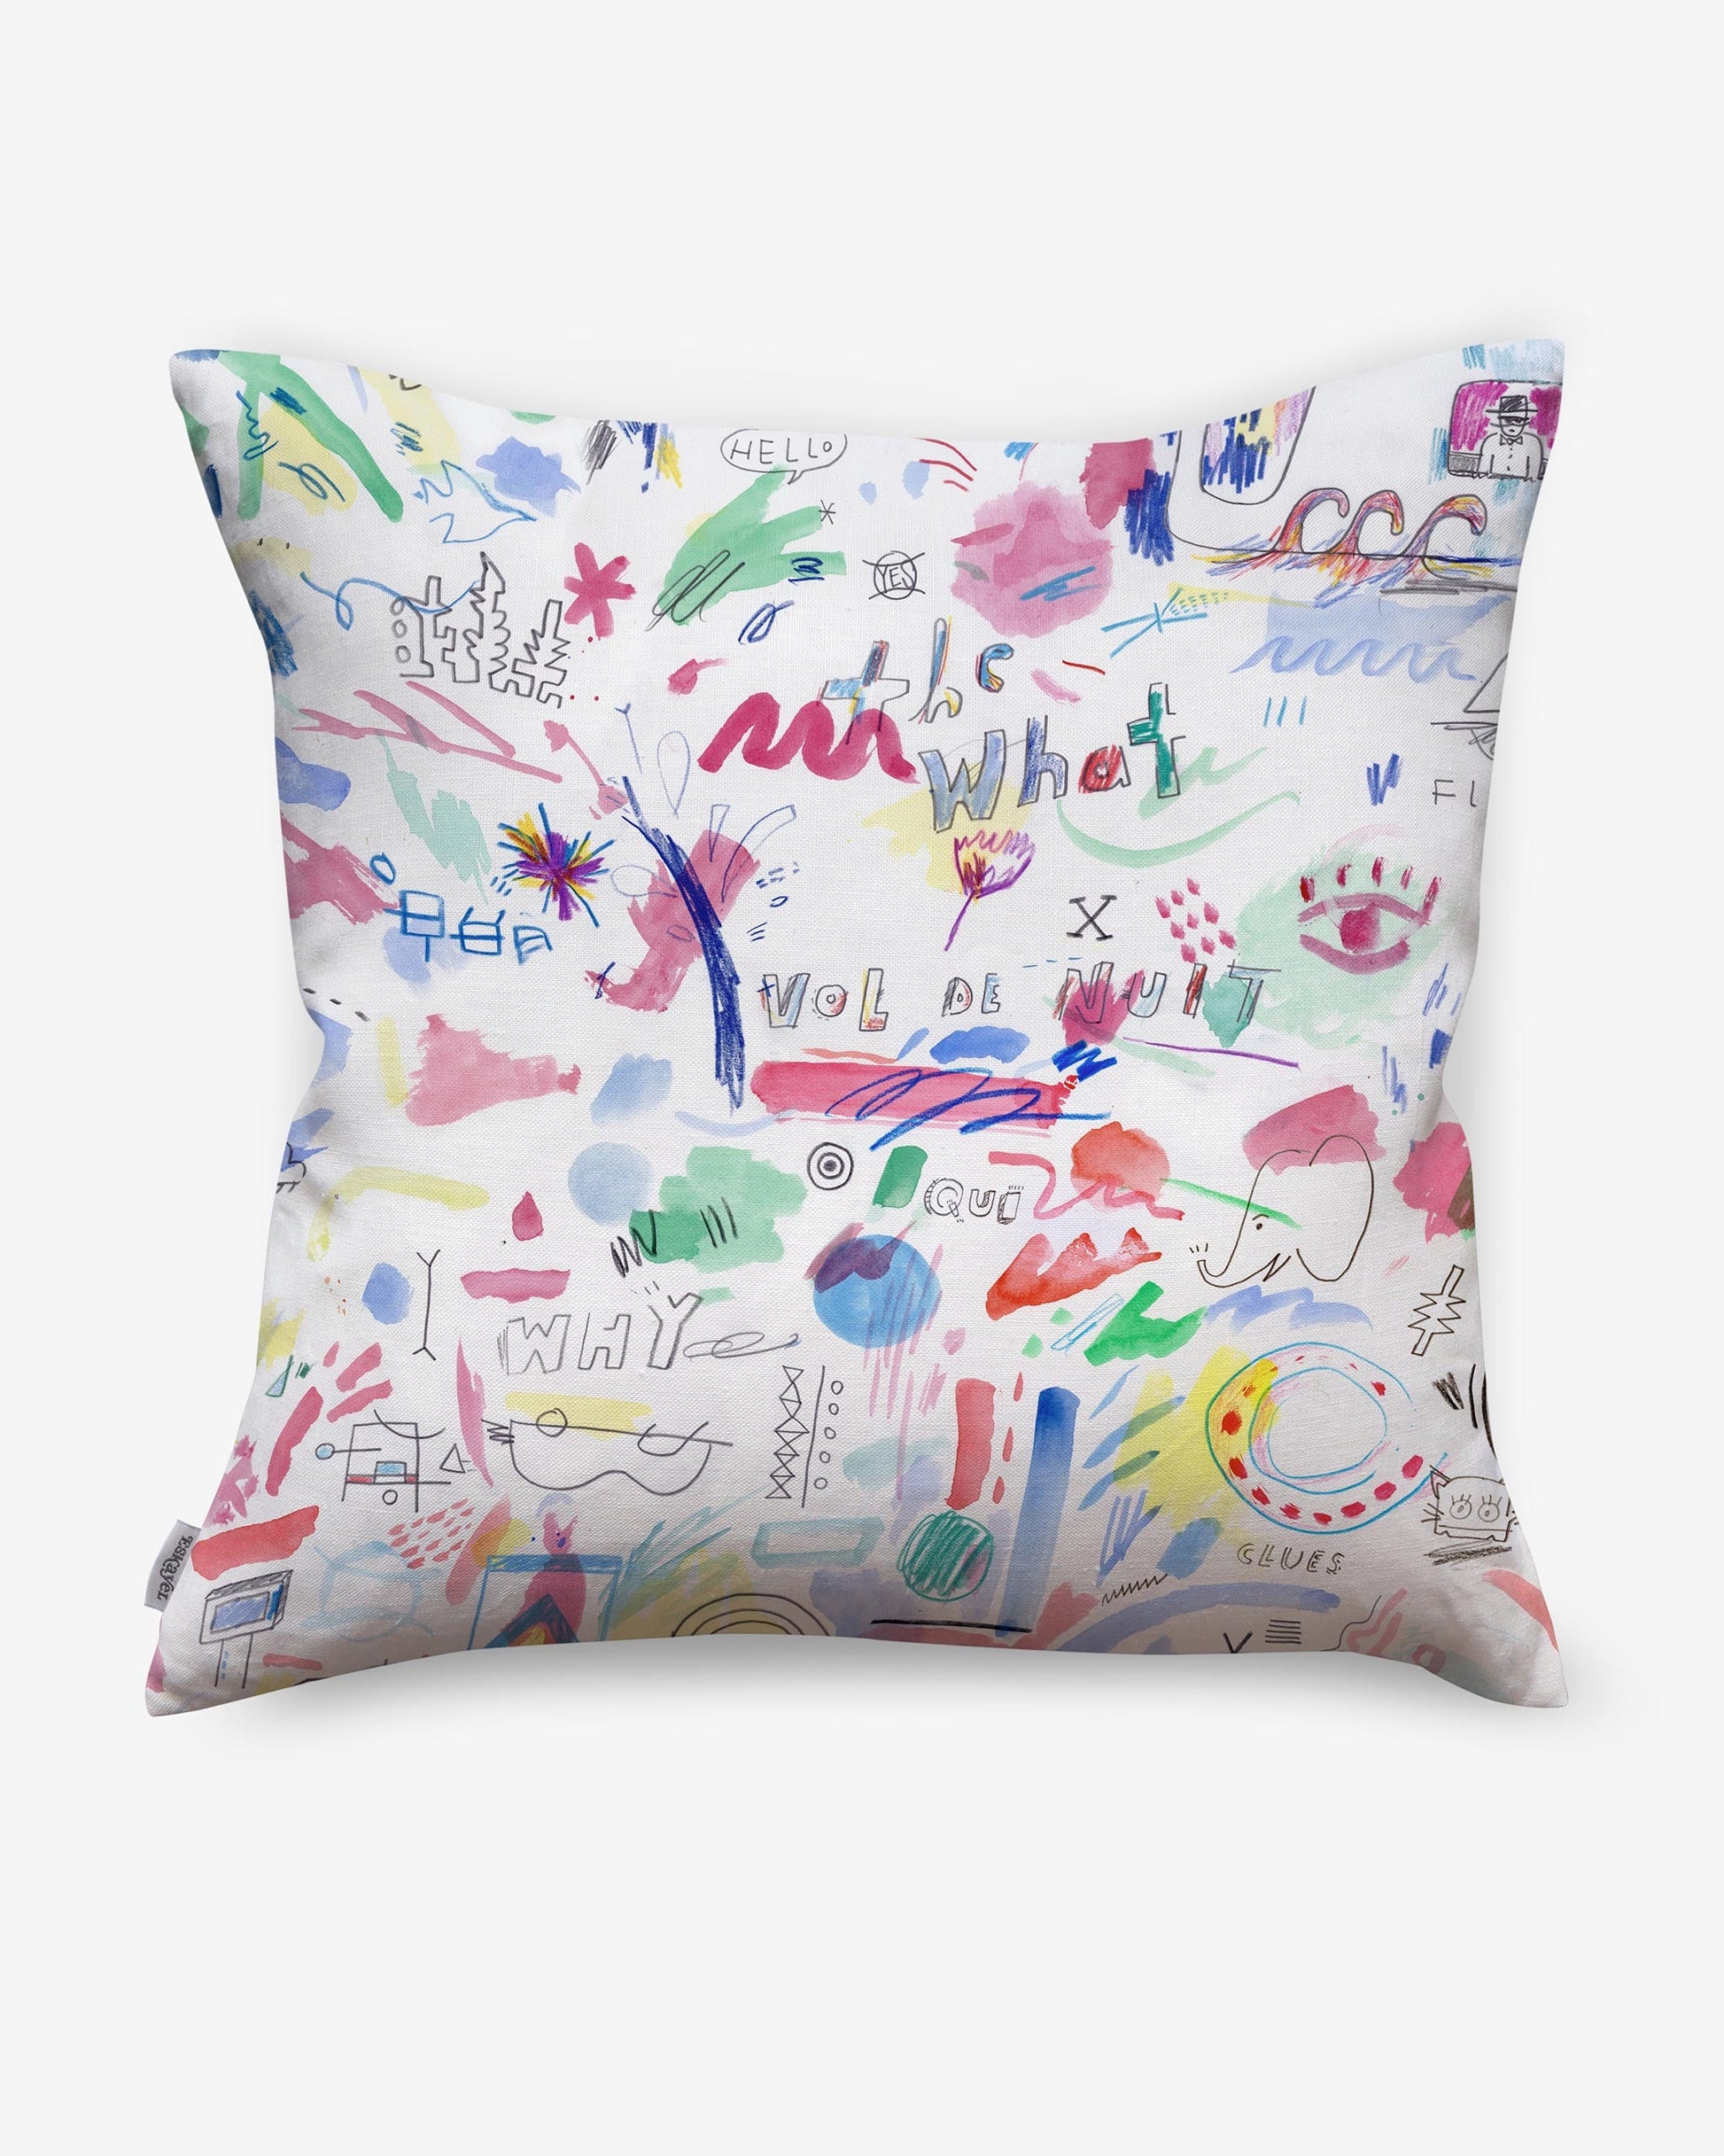 A Vol de Nuit Pillow Multi with a colorful drawing on it